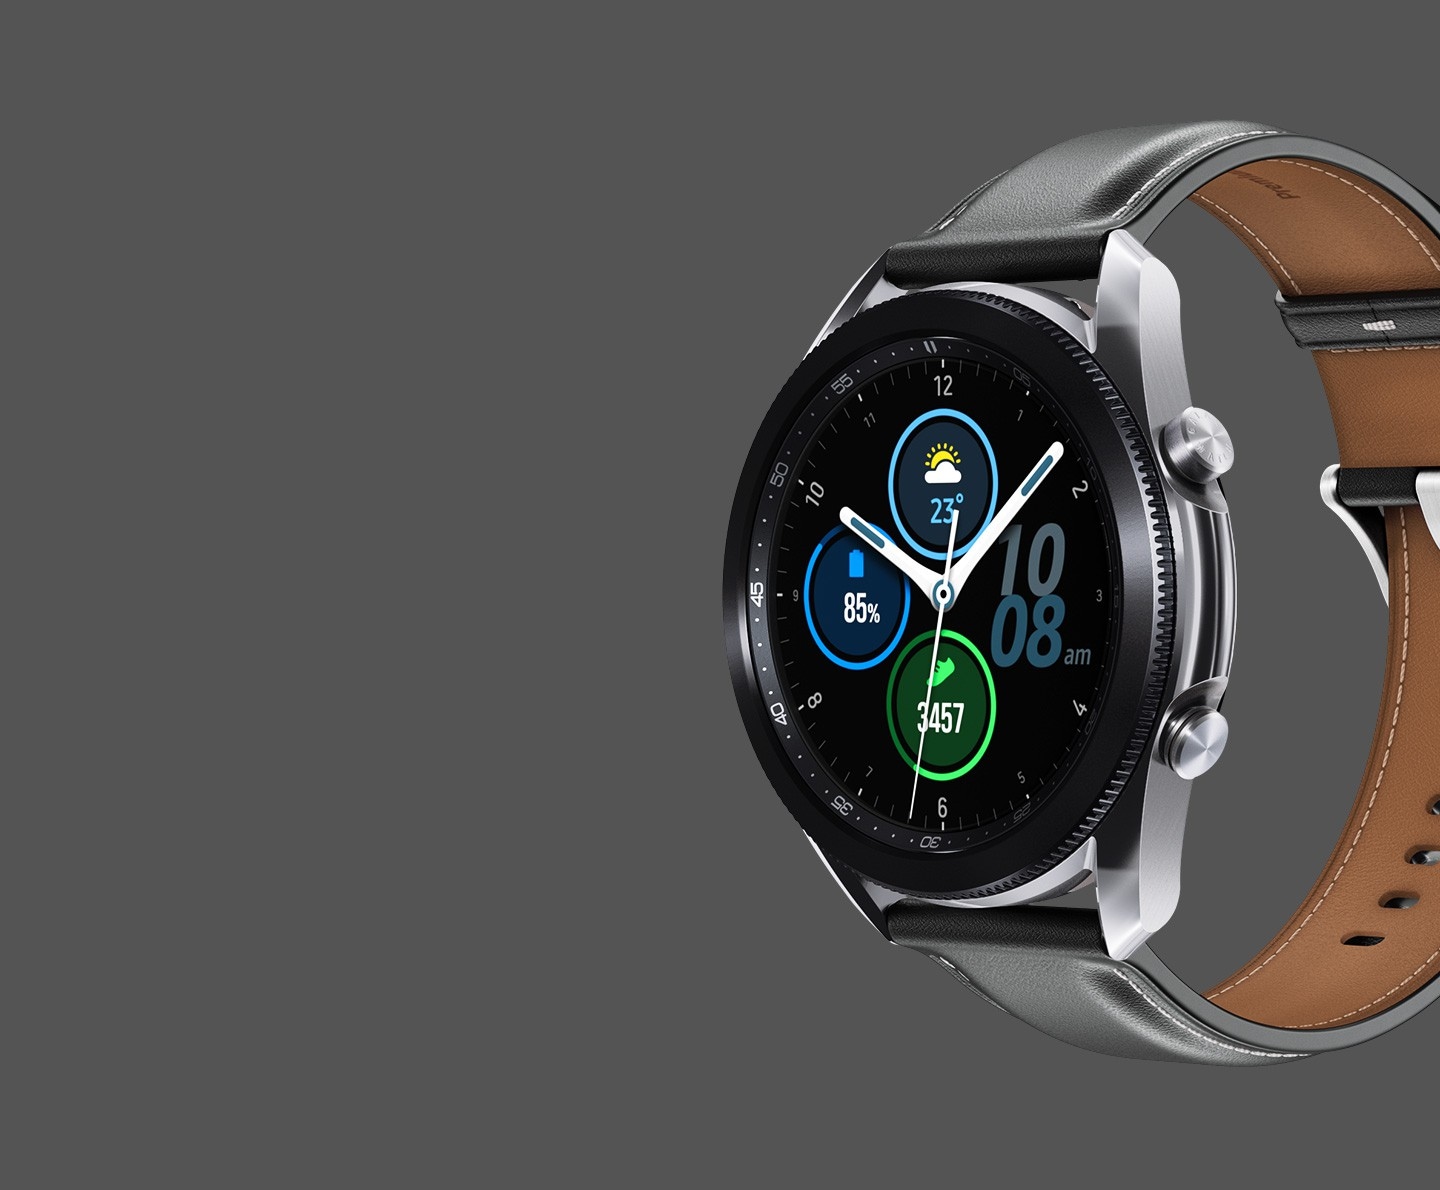 45mm Galaxy Watch3 in Mystic Silver with an Analog Modular Watch Face seen from an angle